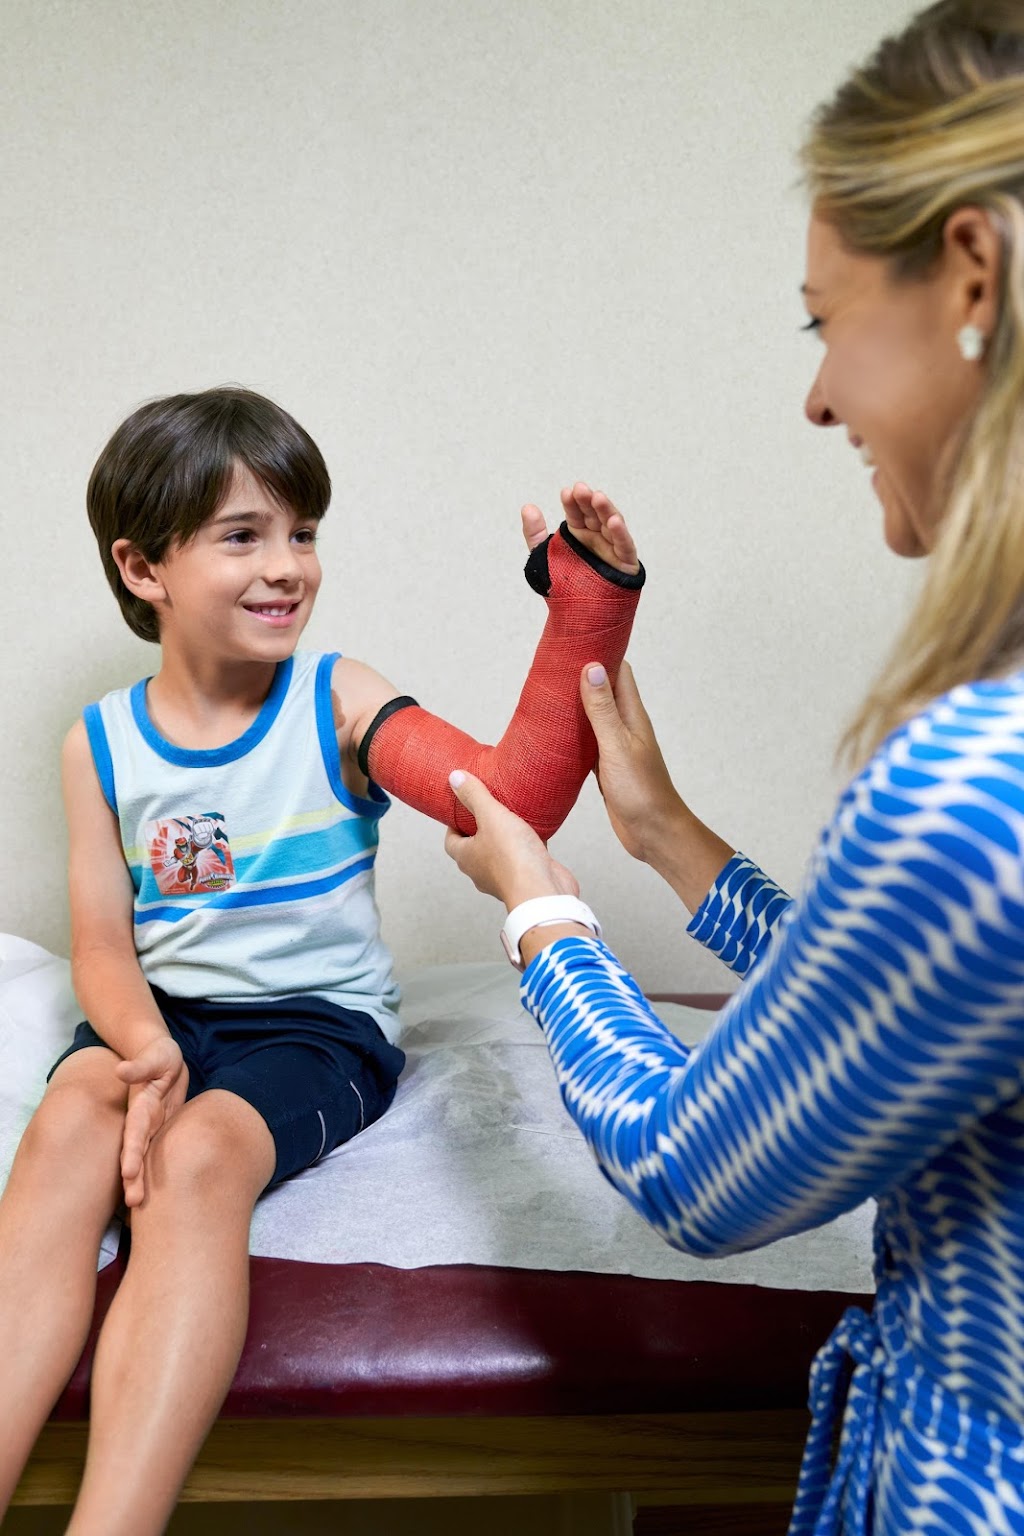 Childrens Orthopaedics and Sports Medicine - Town Center | 605 Big Shanty Rd NW, Kennesaw, GA 30144, USA | Phone: (404) 255-1933